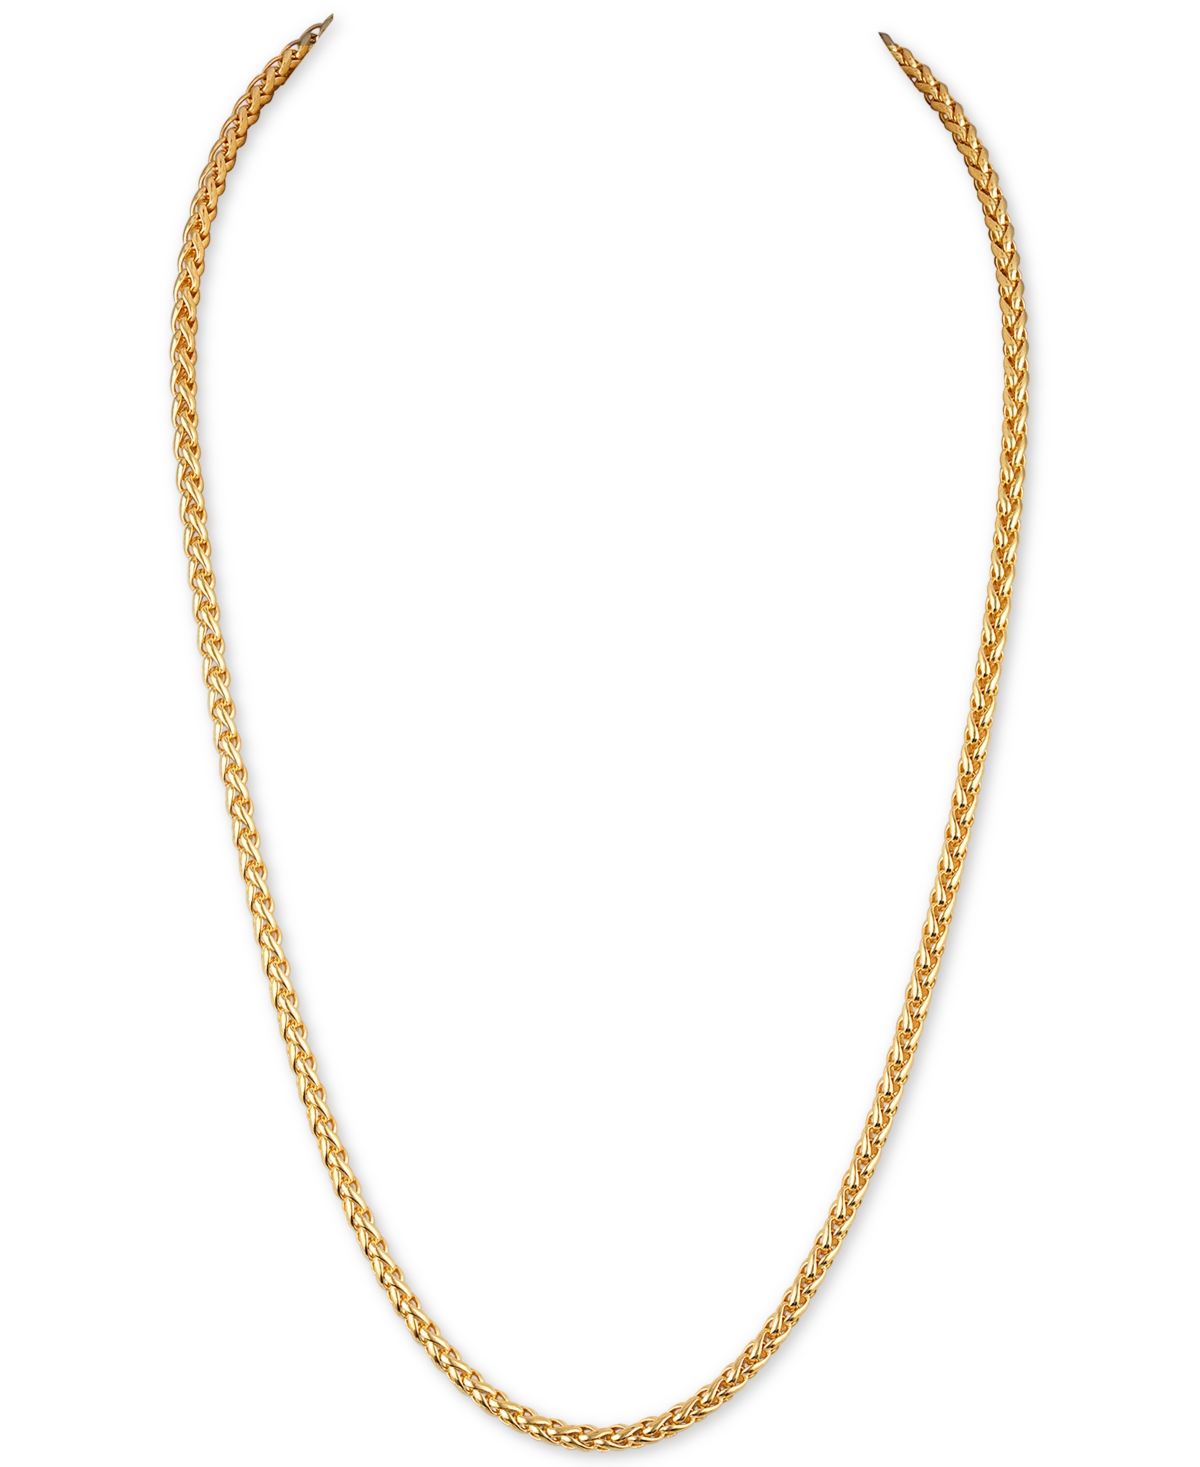 22" Wheat Chain Link Necklace in 14k Gold-Plated Sterling Silver, Created for Macy's - Gold